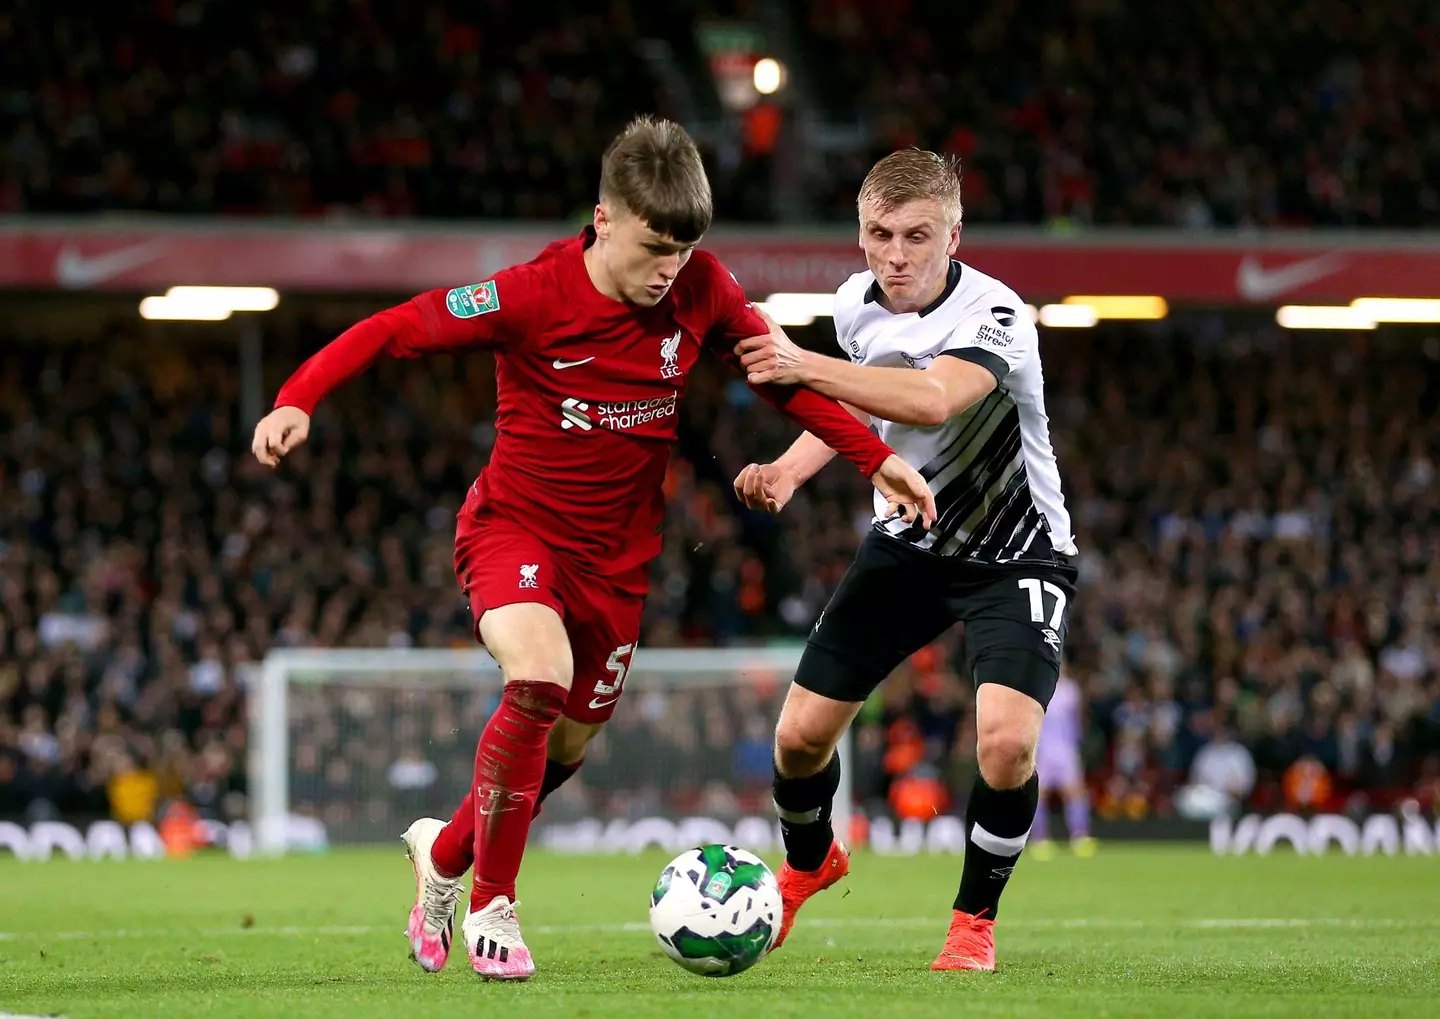 Ben Doak made his senior debut for Liverpool against Derby County (Image: Alamy)